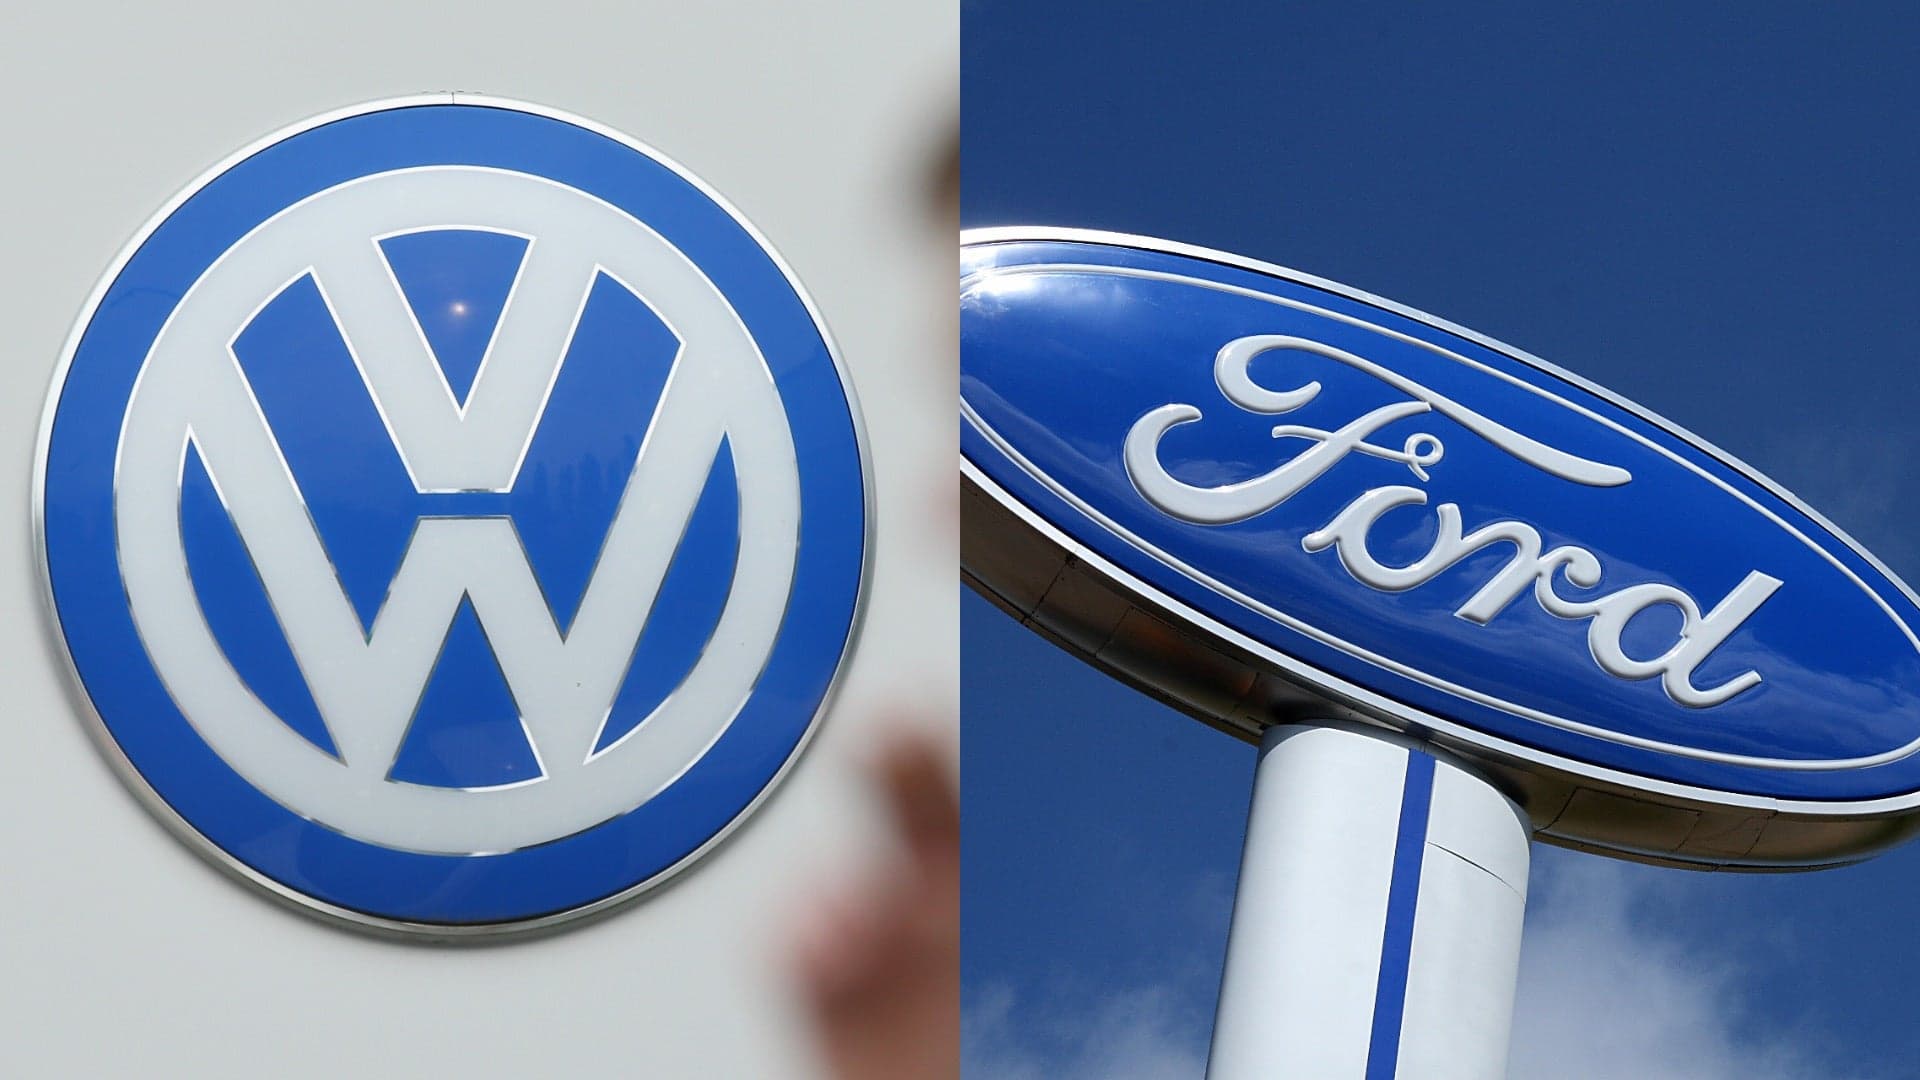 Ford and VW Partnership Rumors Emerge as Manufacturer Alliances Expand: Report